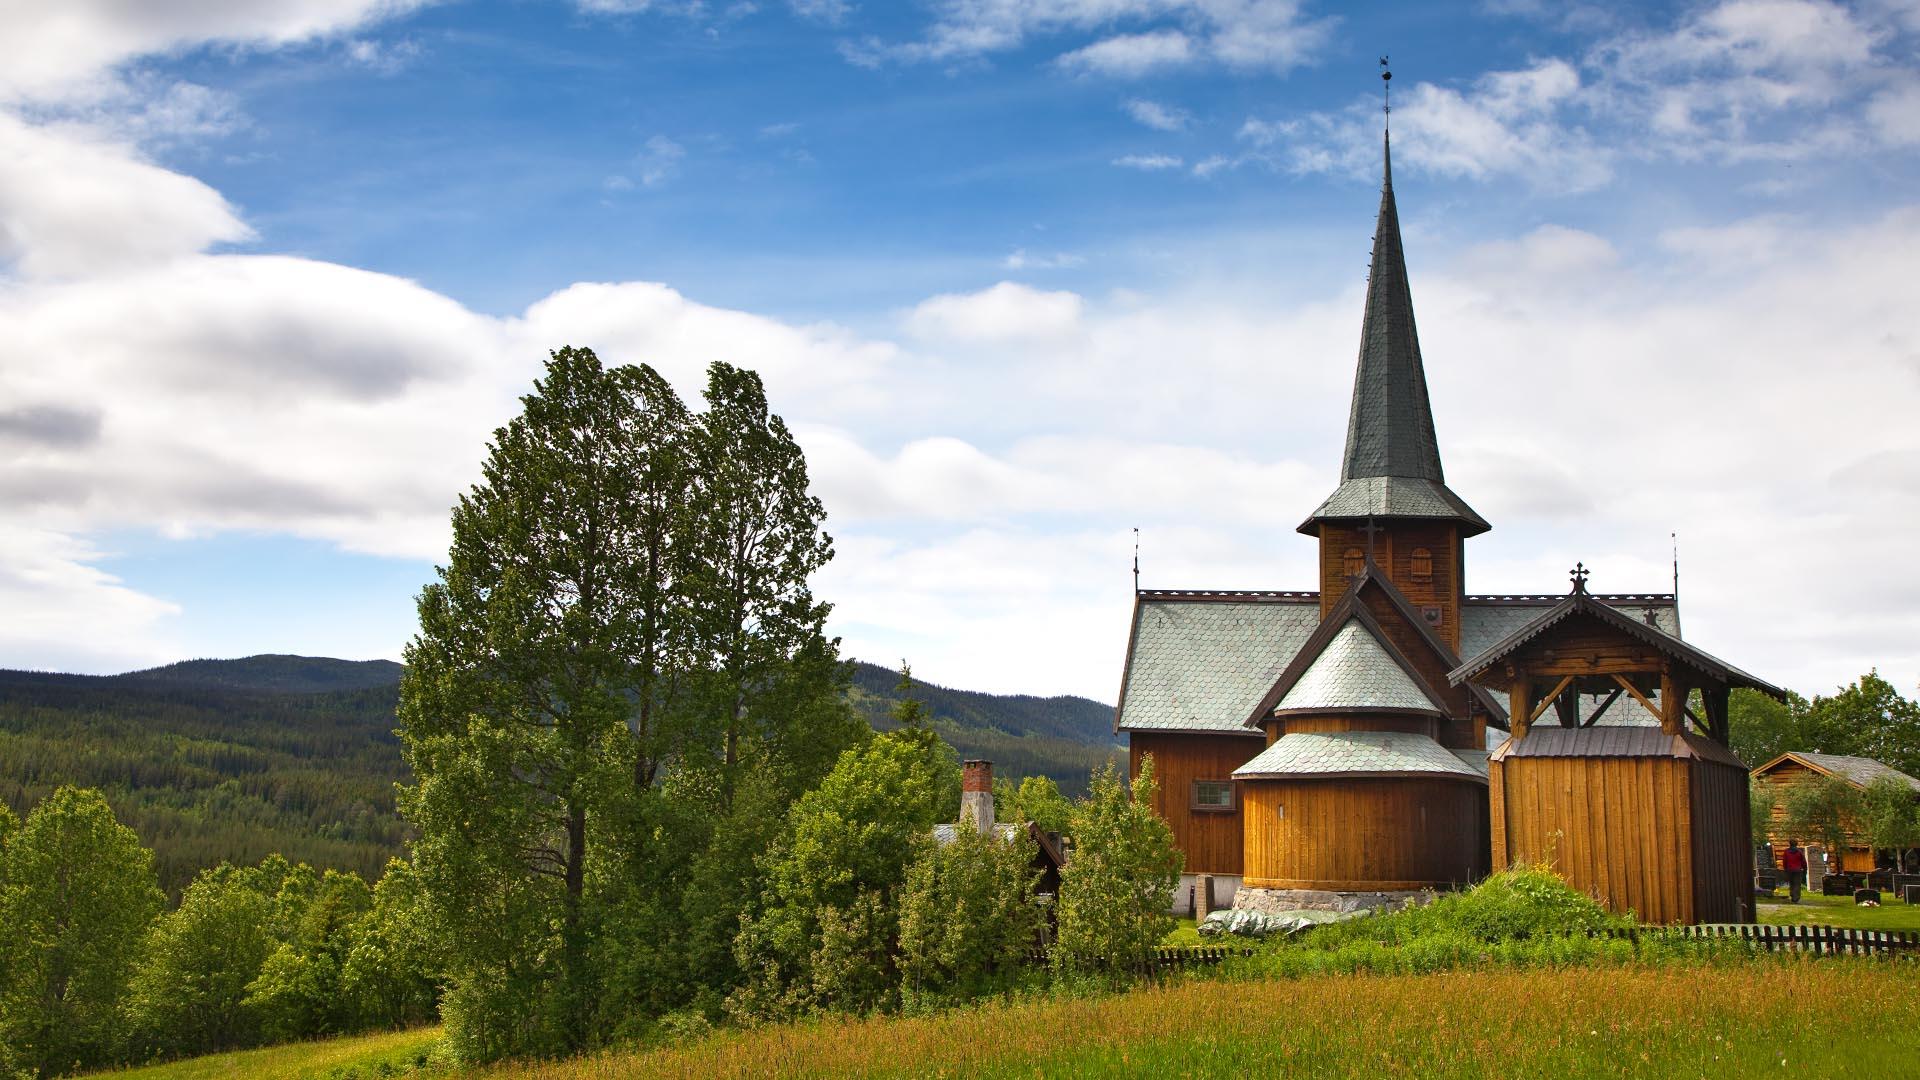 Summer day with green pastures, green trees and a stave church in the background